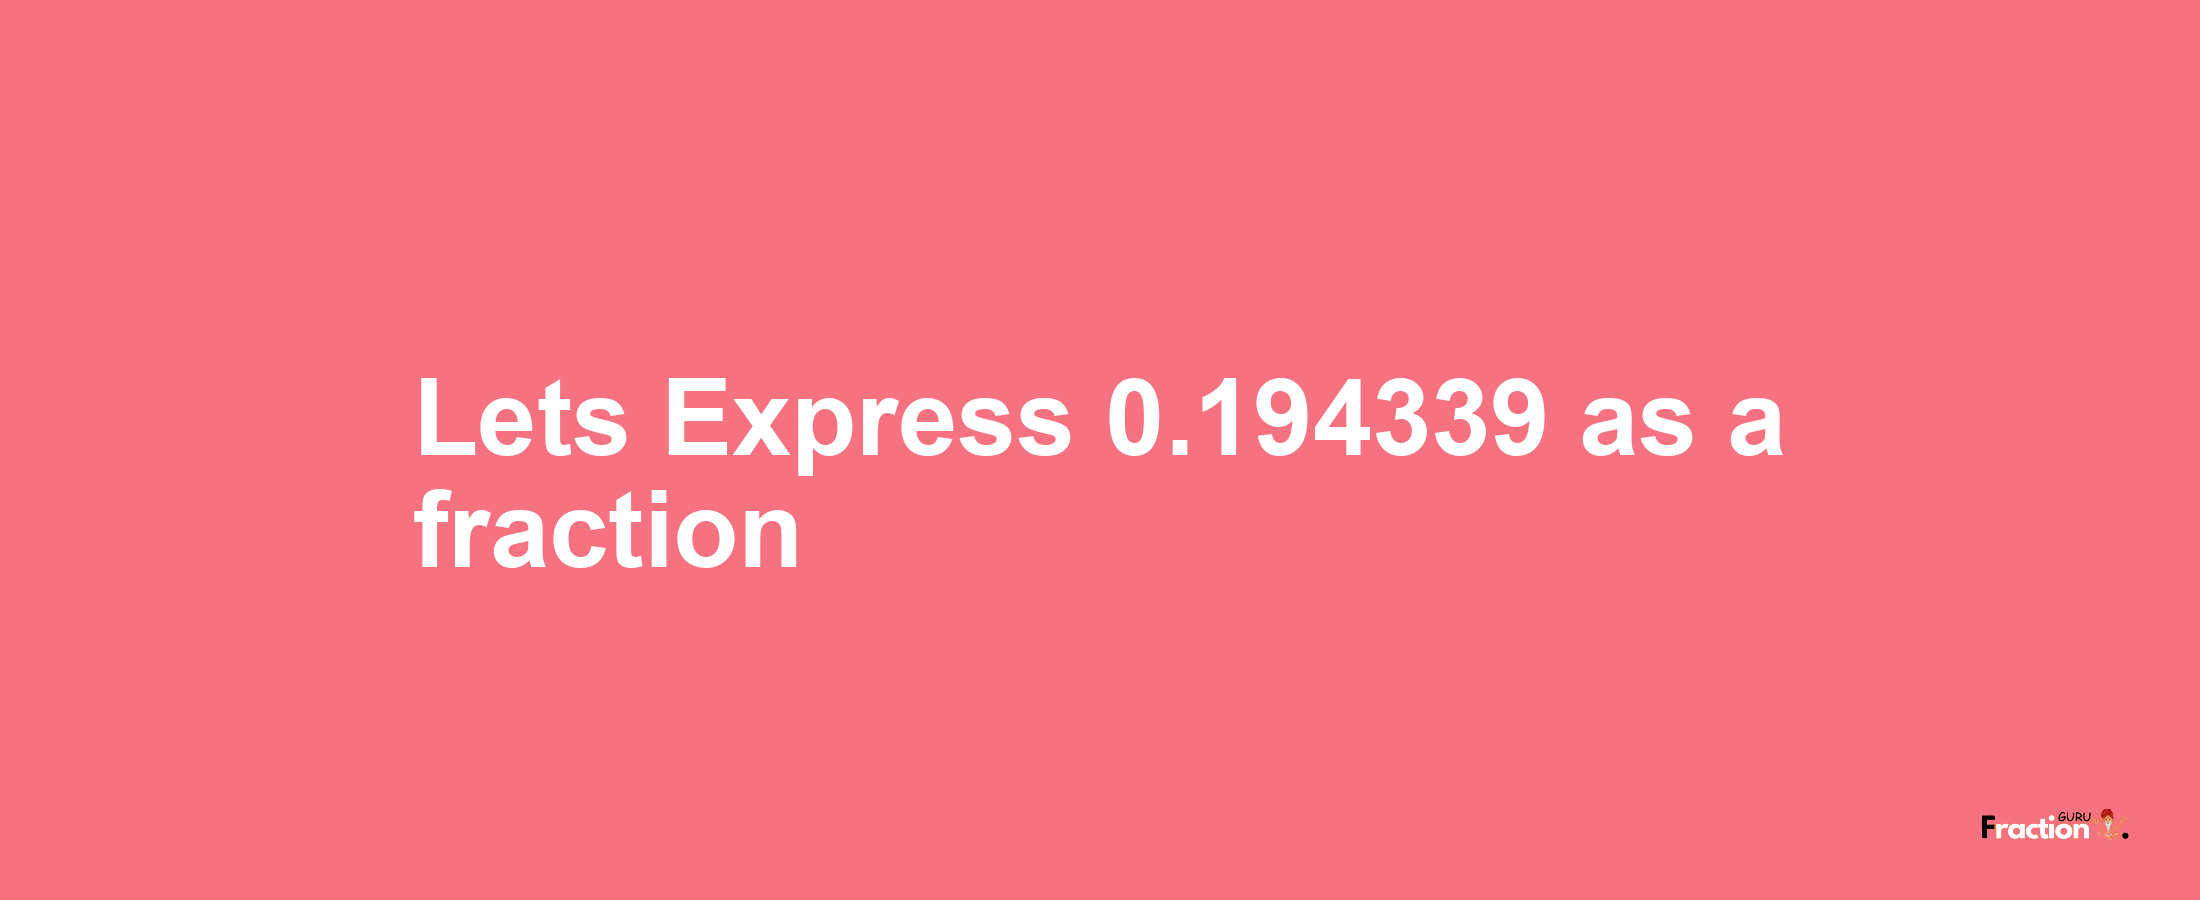 Lets Express 0.194339 as afraction